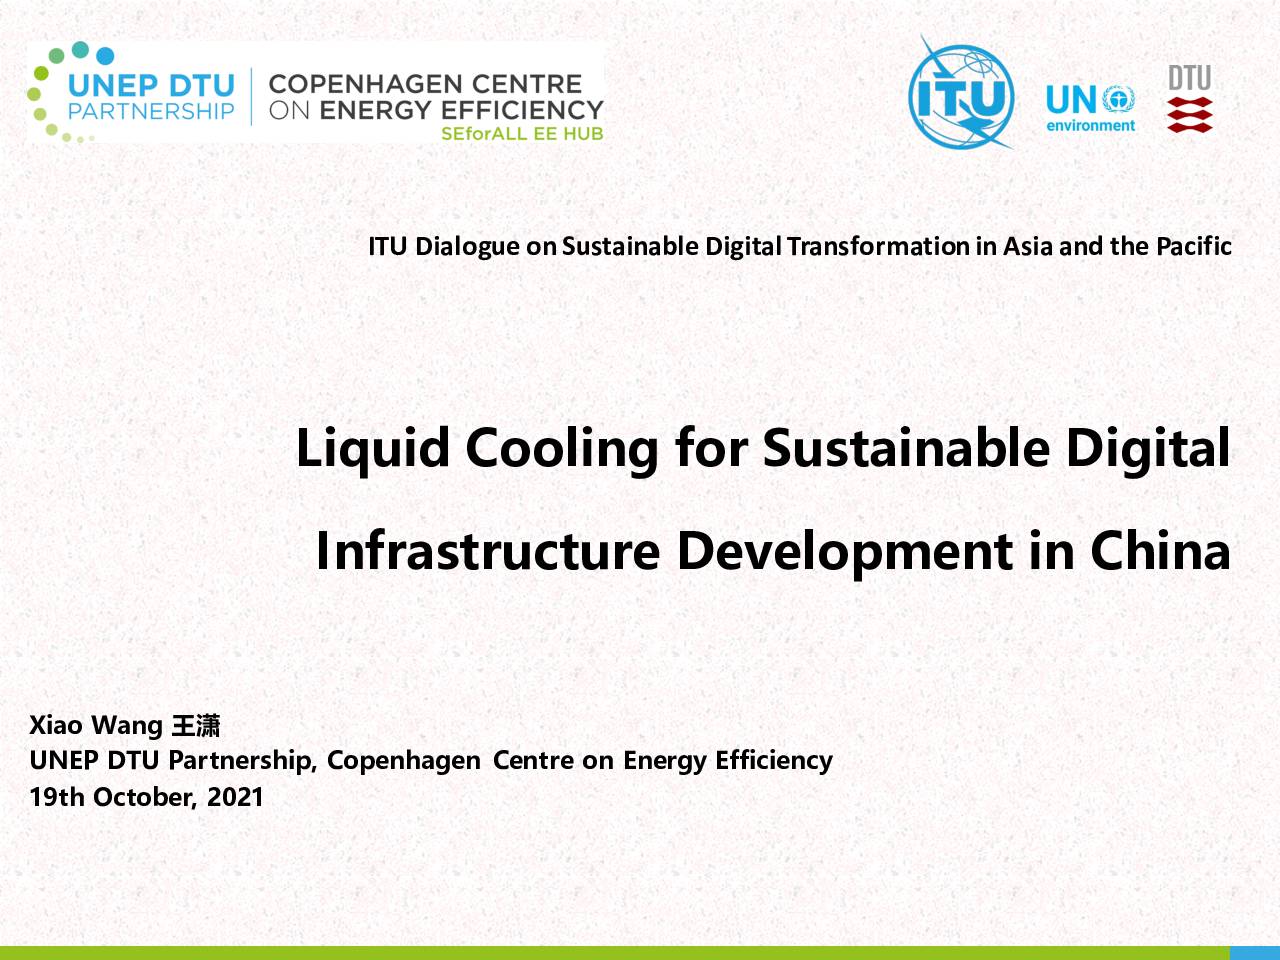 Liquid Cooling for Sustainable Digital Infrastructure Development in China (Presentation)